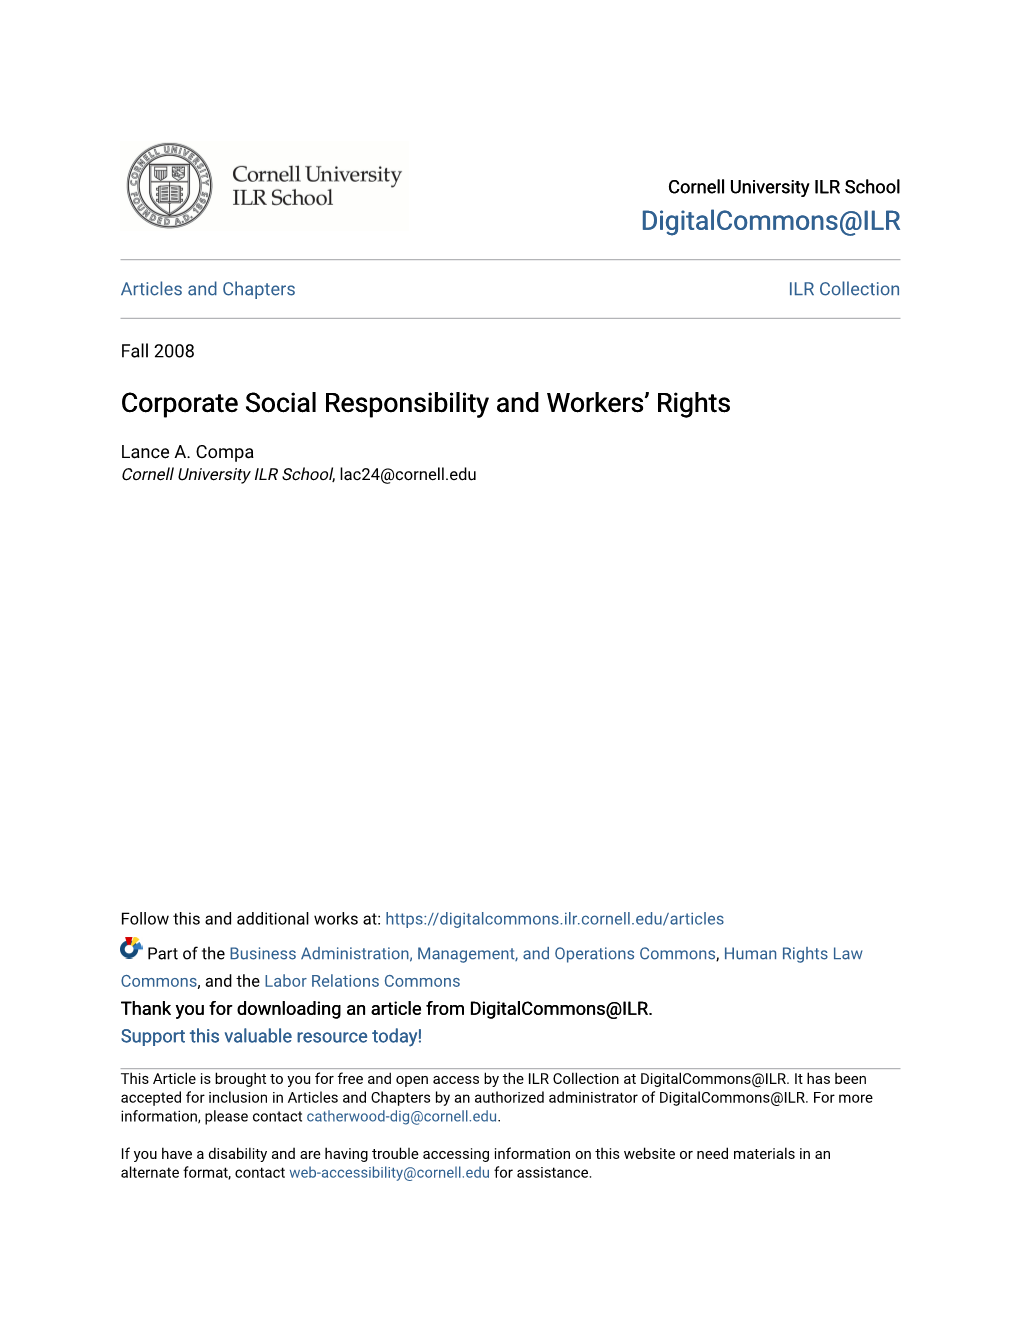 Corporate Social Responsibility and Workers' Rights